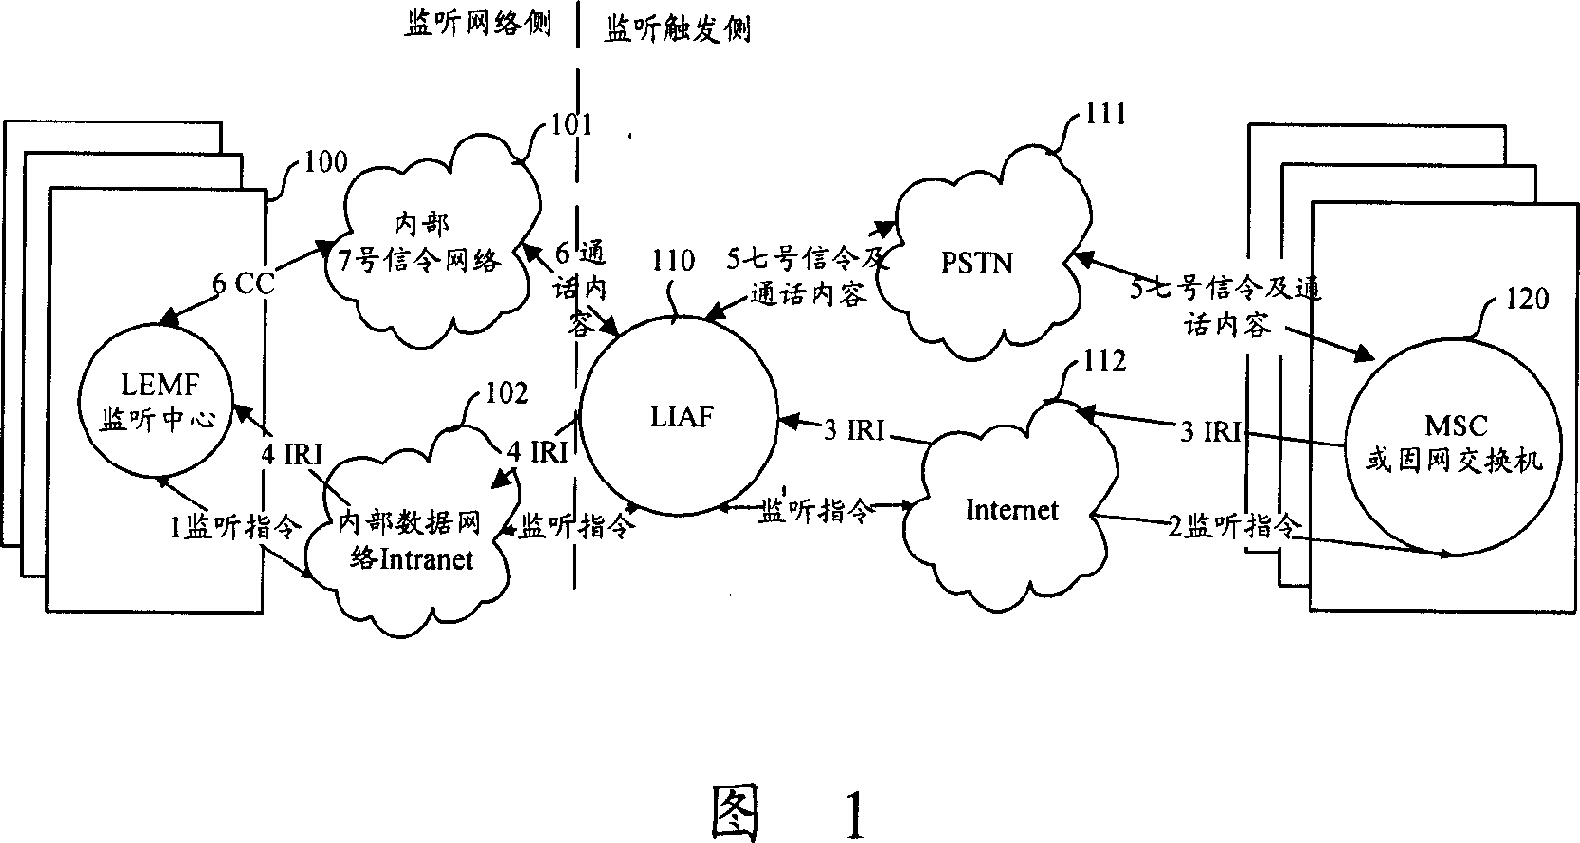 System and method for monitoring network